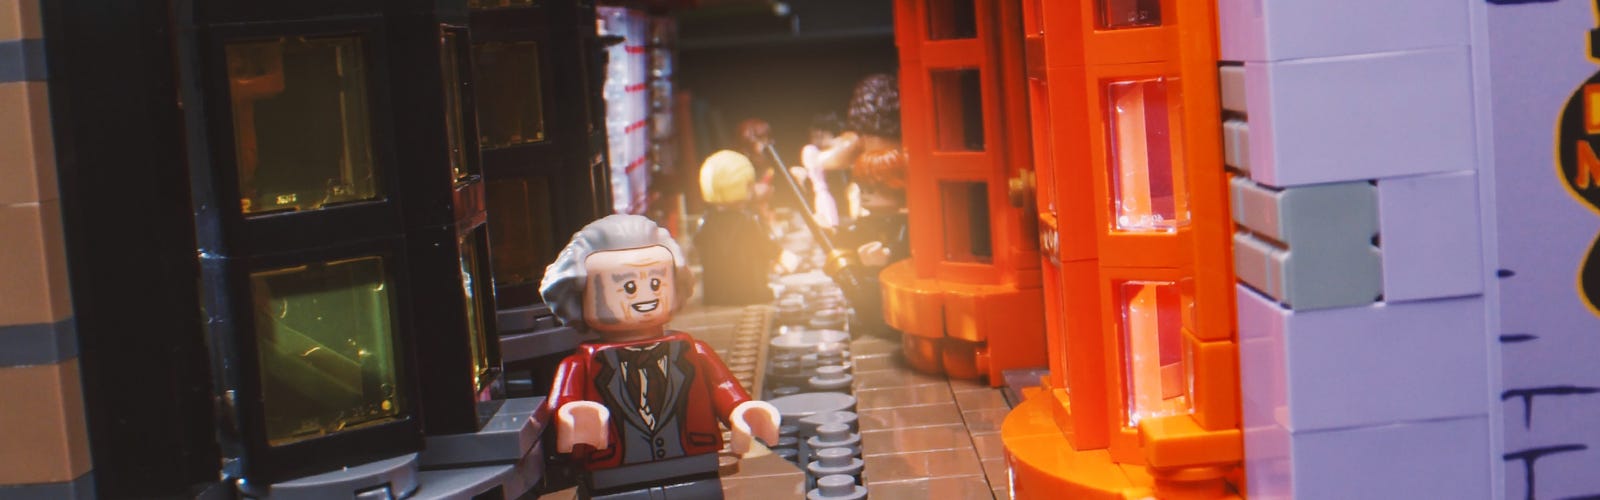 CW:HP) LEGO® Harry Potter 75978 Diagon Alley: the reveal